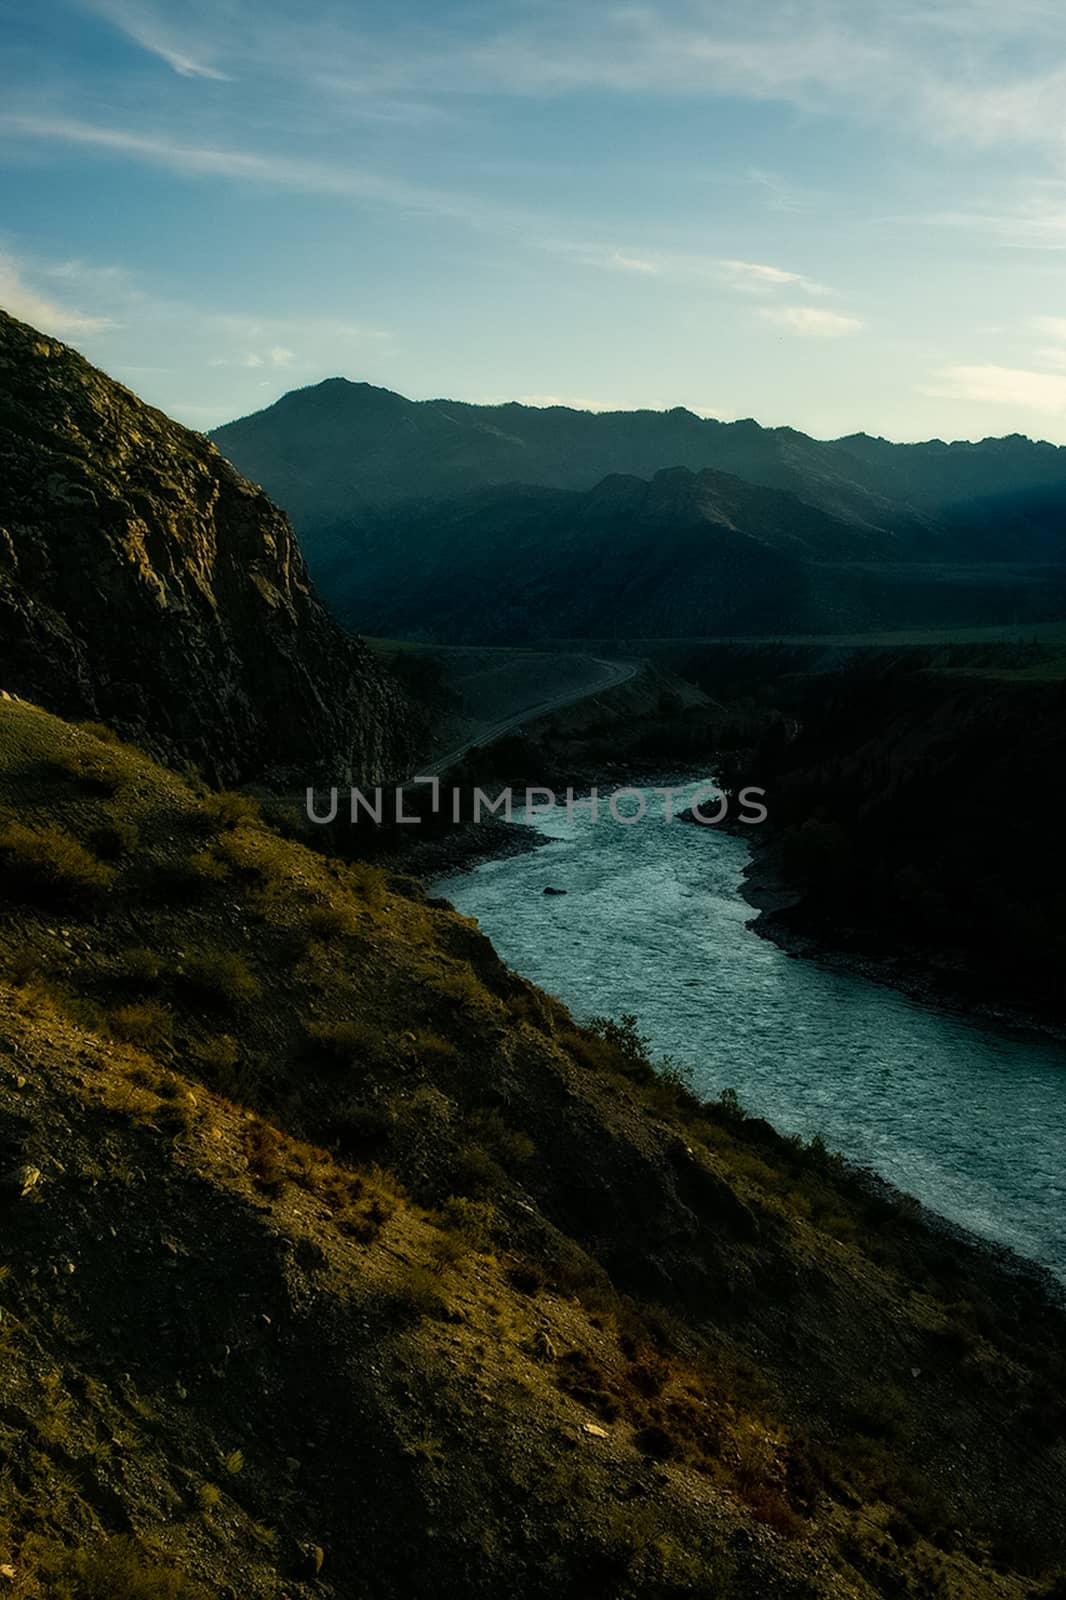 The altai mountains. The landscape of nature on the Altai mountains and in the gorges between the mountains.